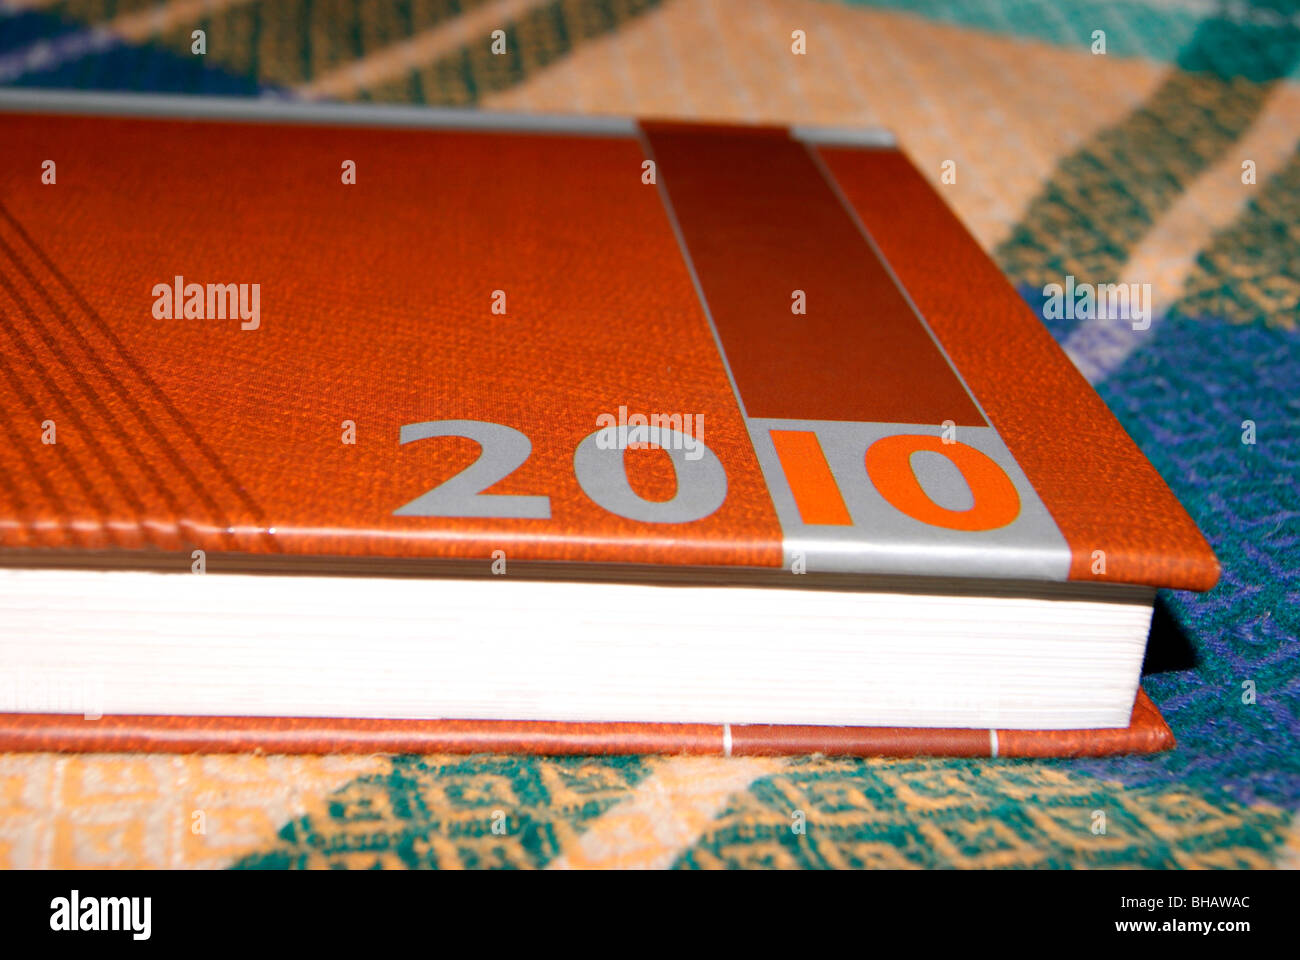 2010 Dairy book fallen on Bed Stock Photo